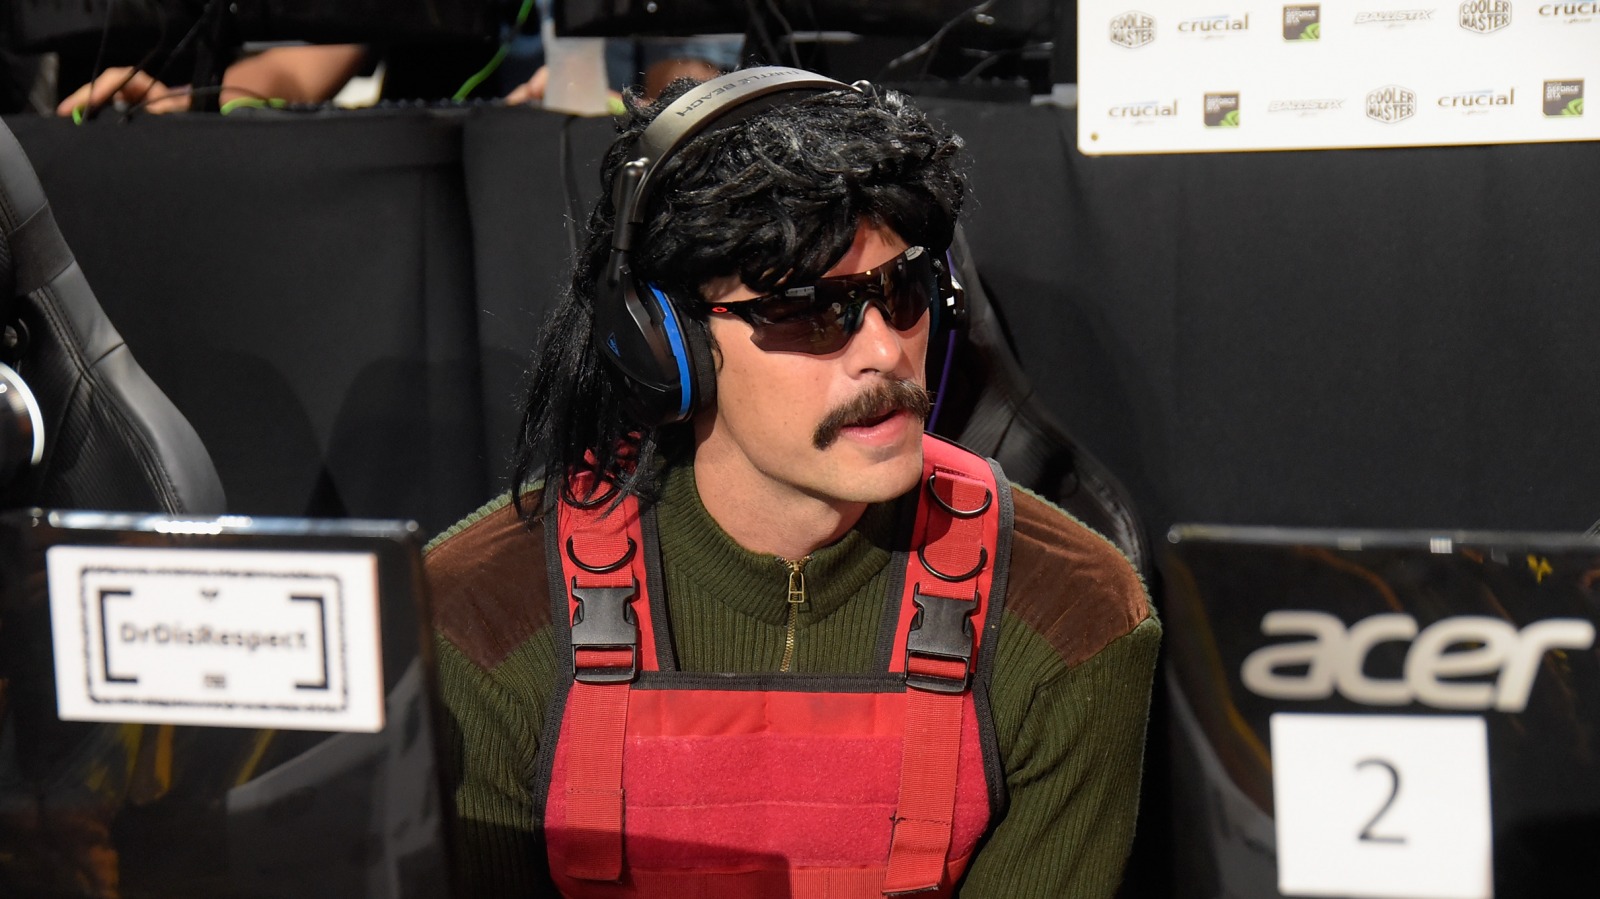 What Dr Disrespect Was Before The Fame